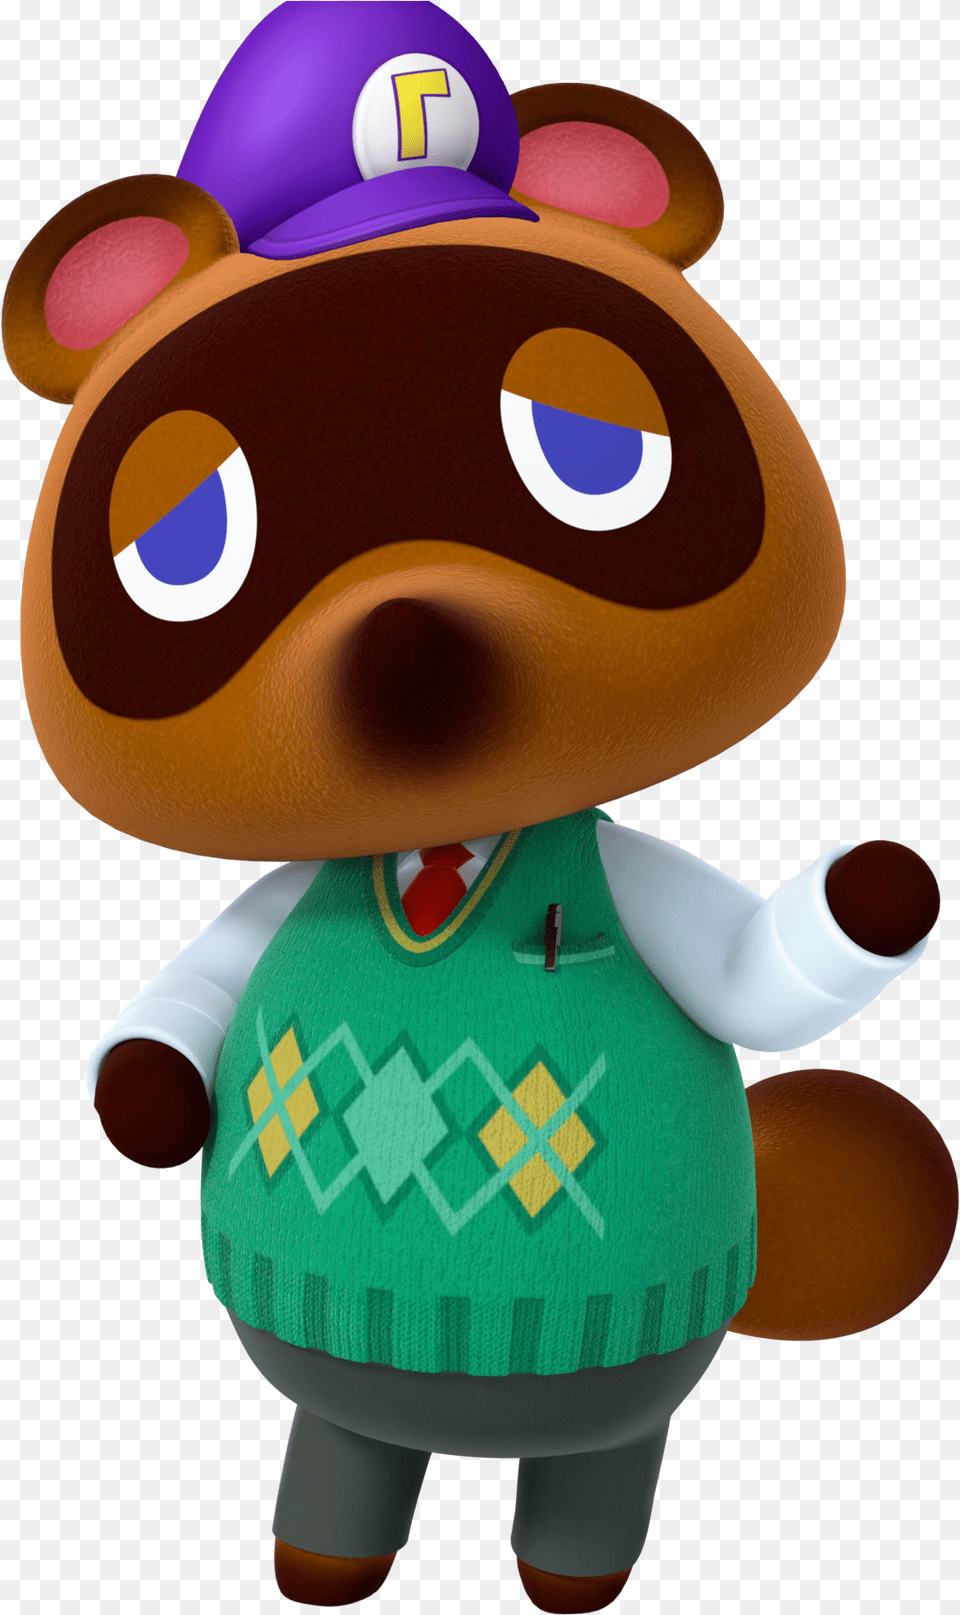 Waluigis Hat On Tom Nook Animal Crossing Character Tom Nook, Plush, Toy Png